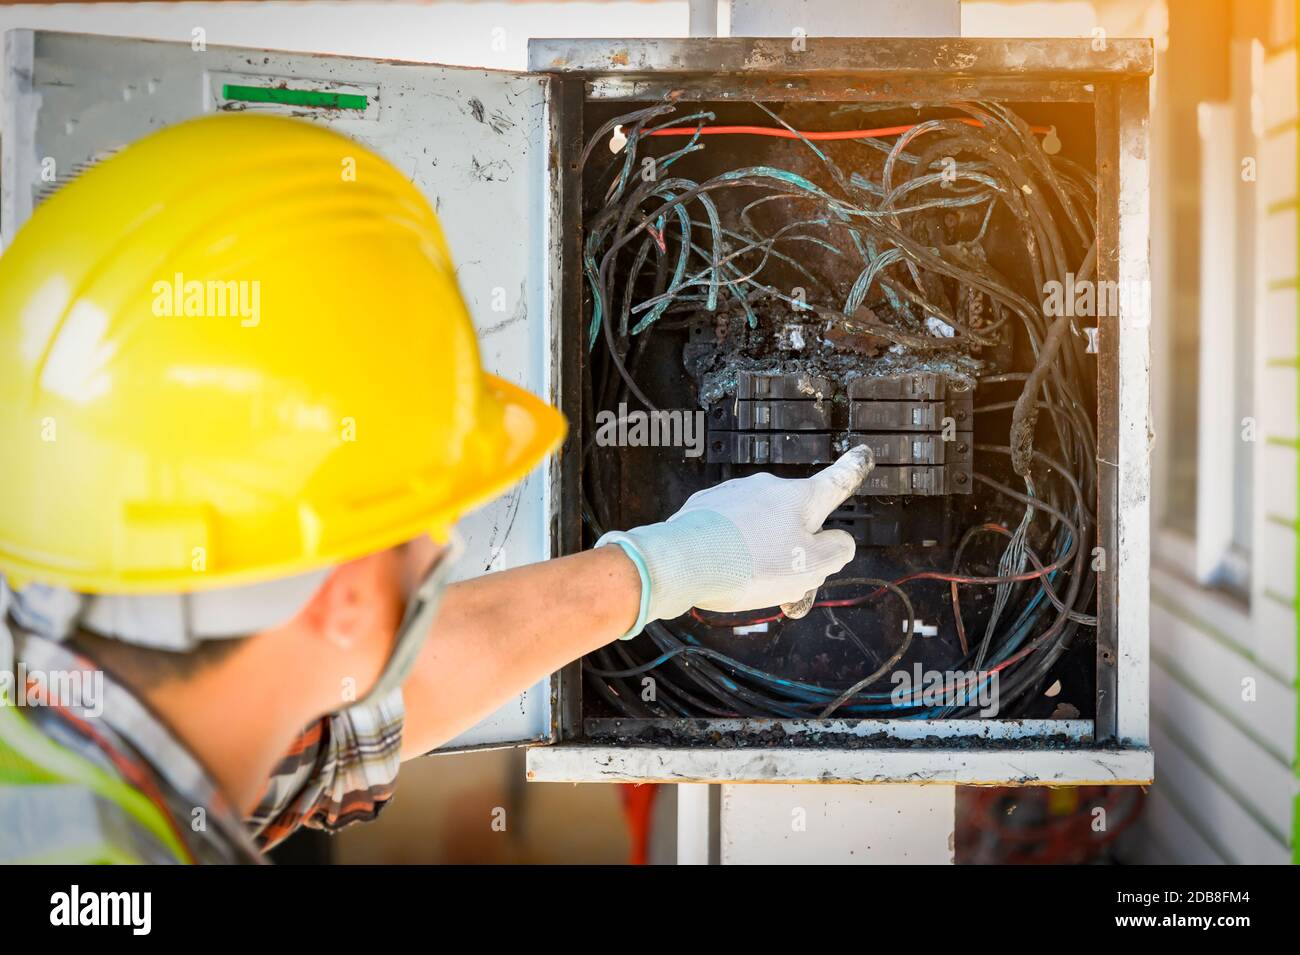 Electrician checking an control panel after an electrical fire, Thailand Stock Photo